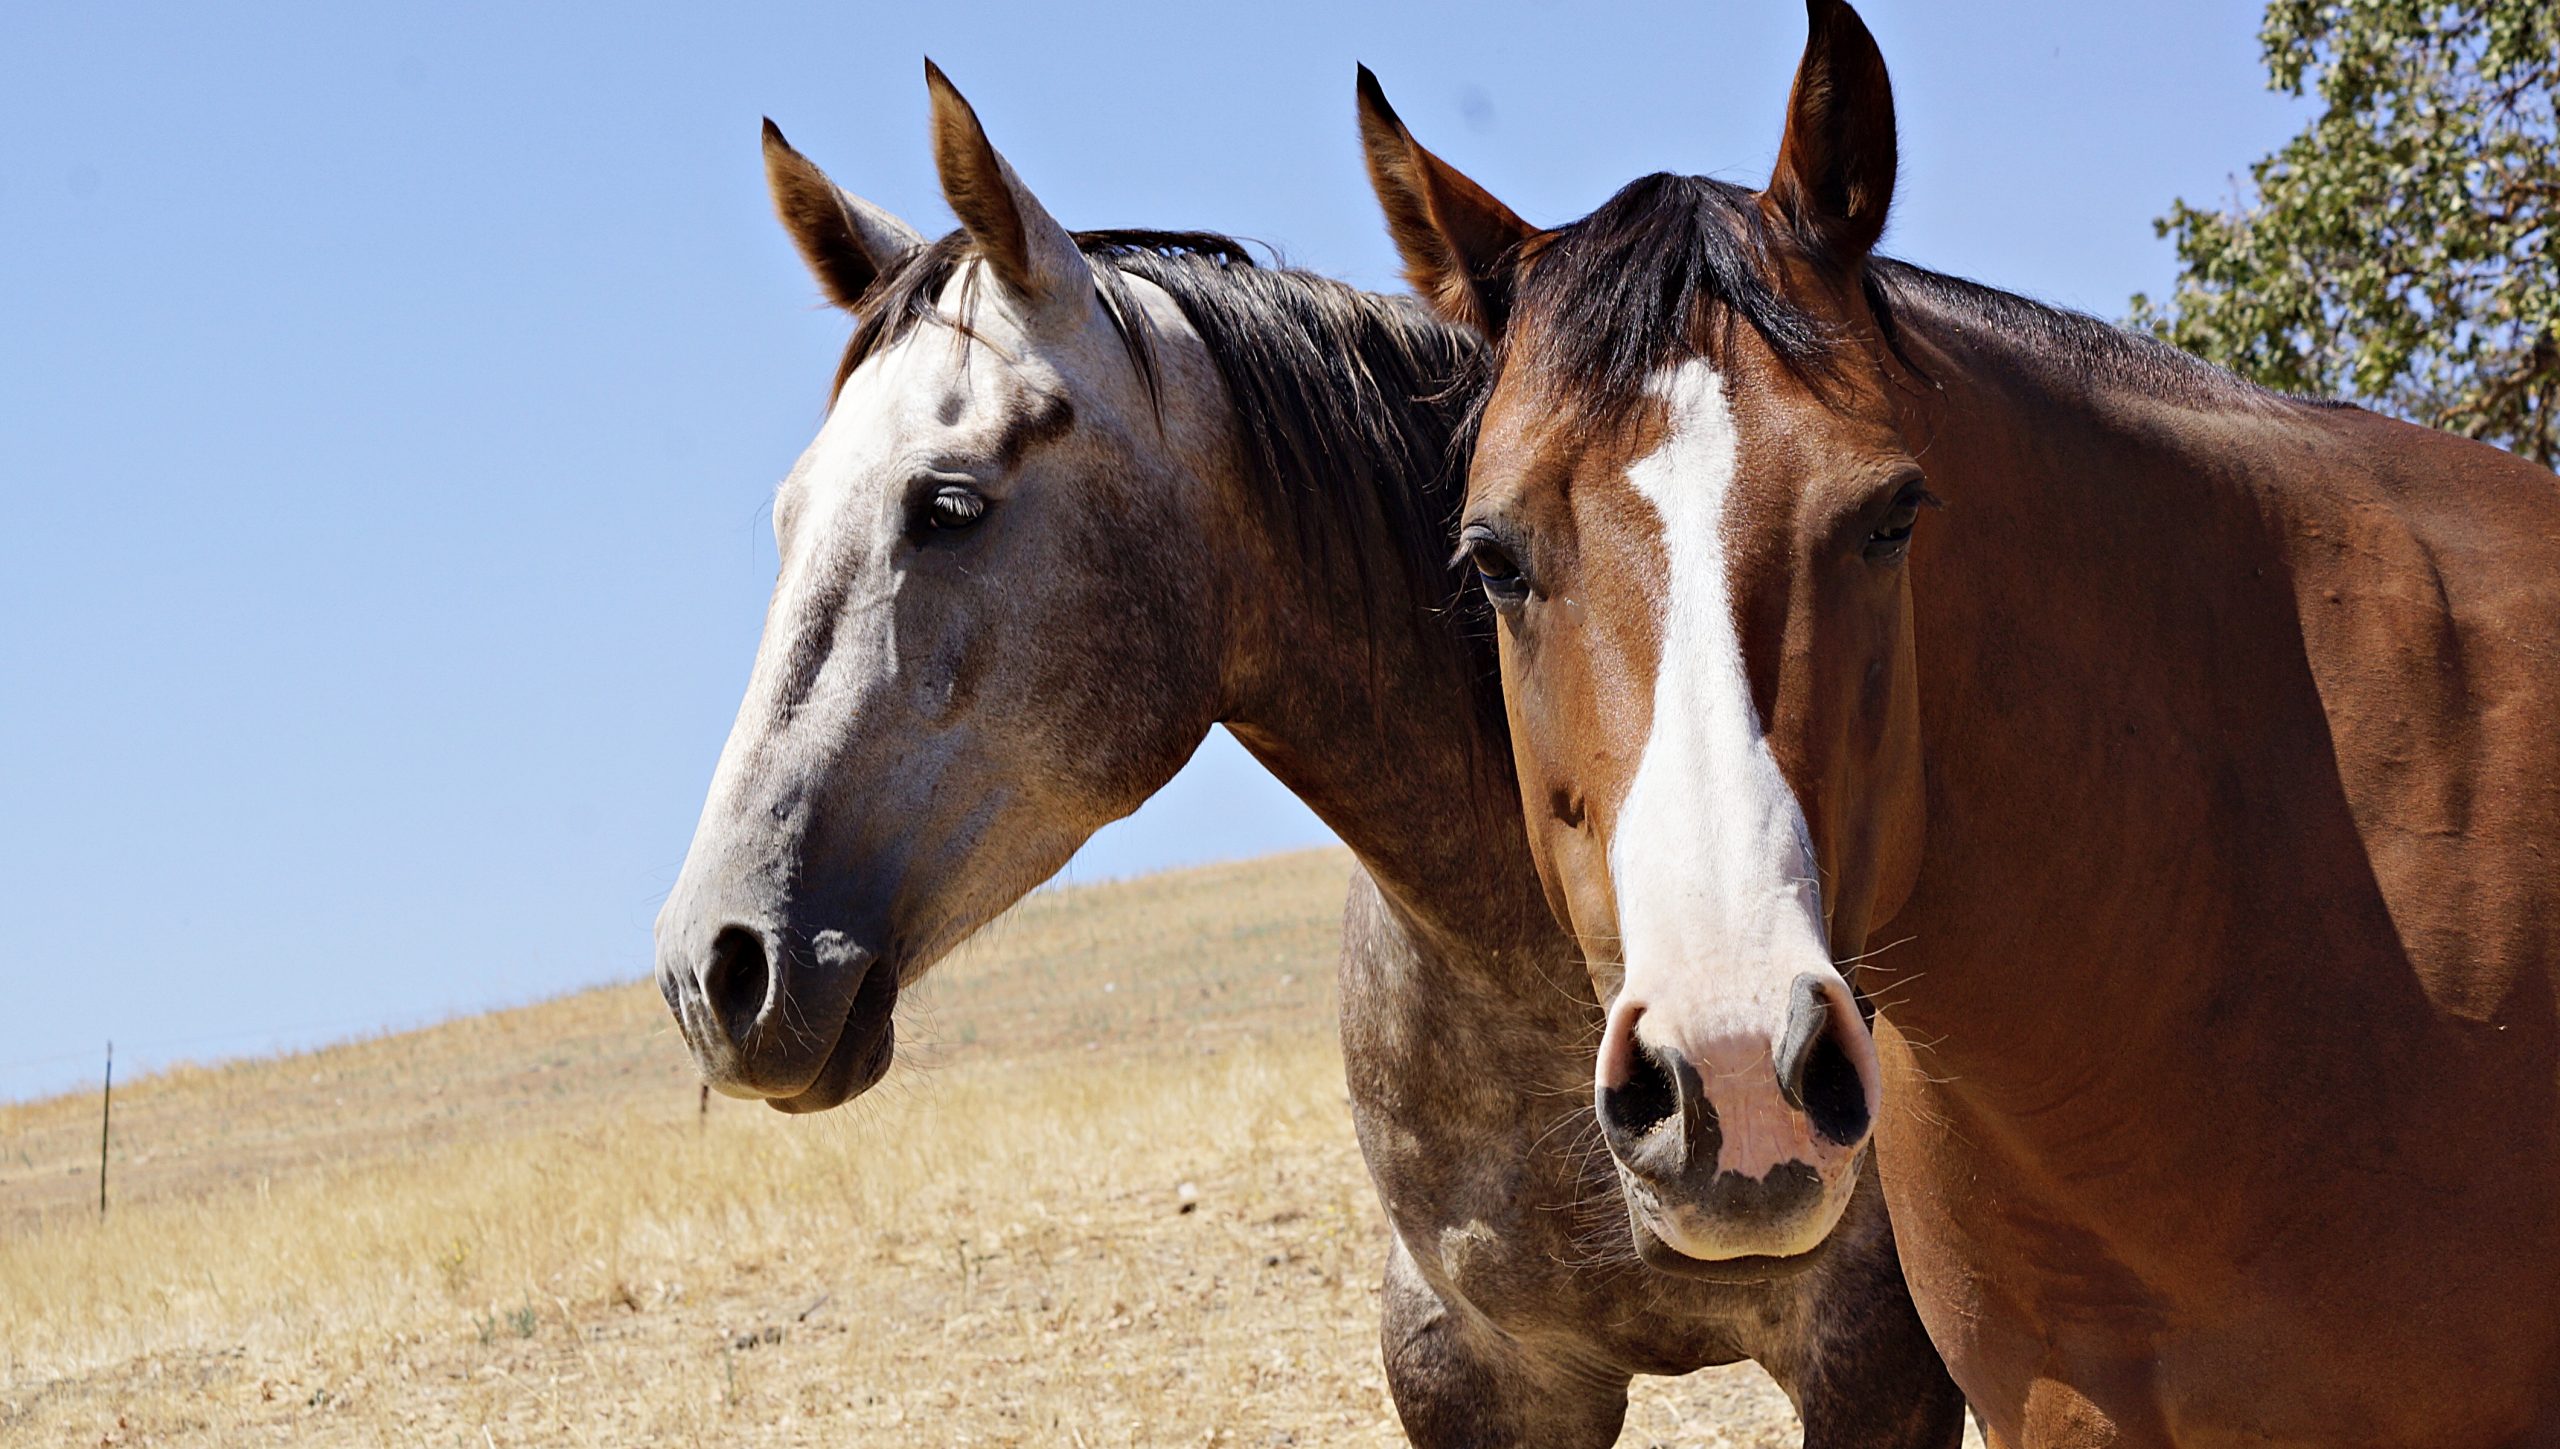 Horse Life : It's Not All About Saddle Time | SLO Horse News